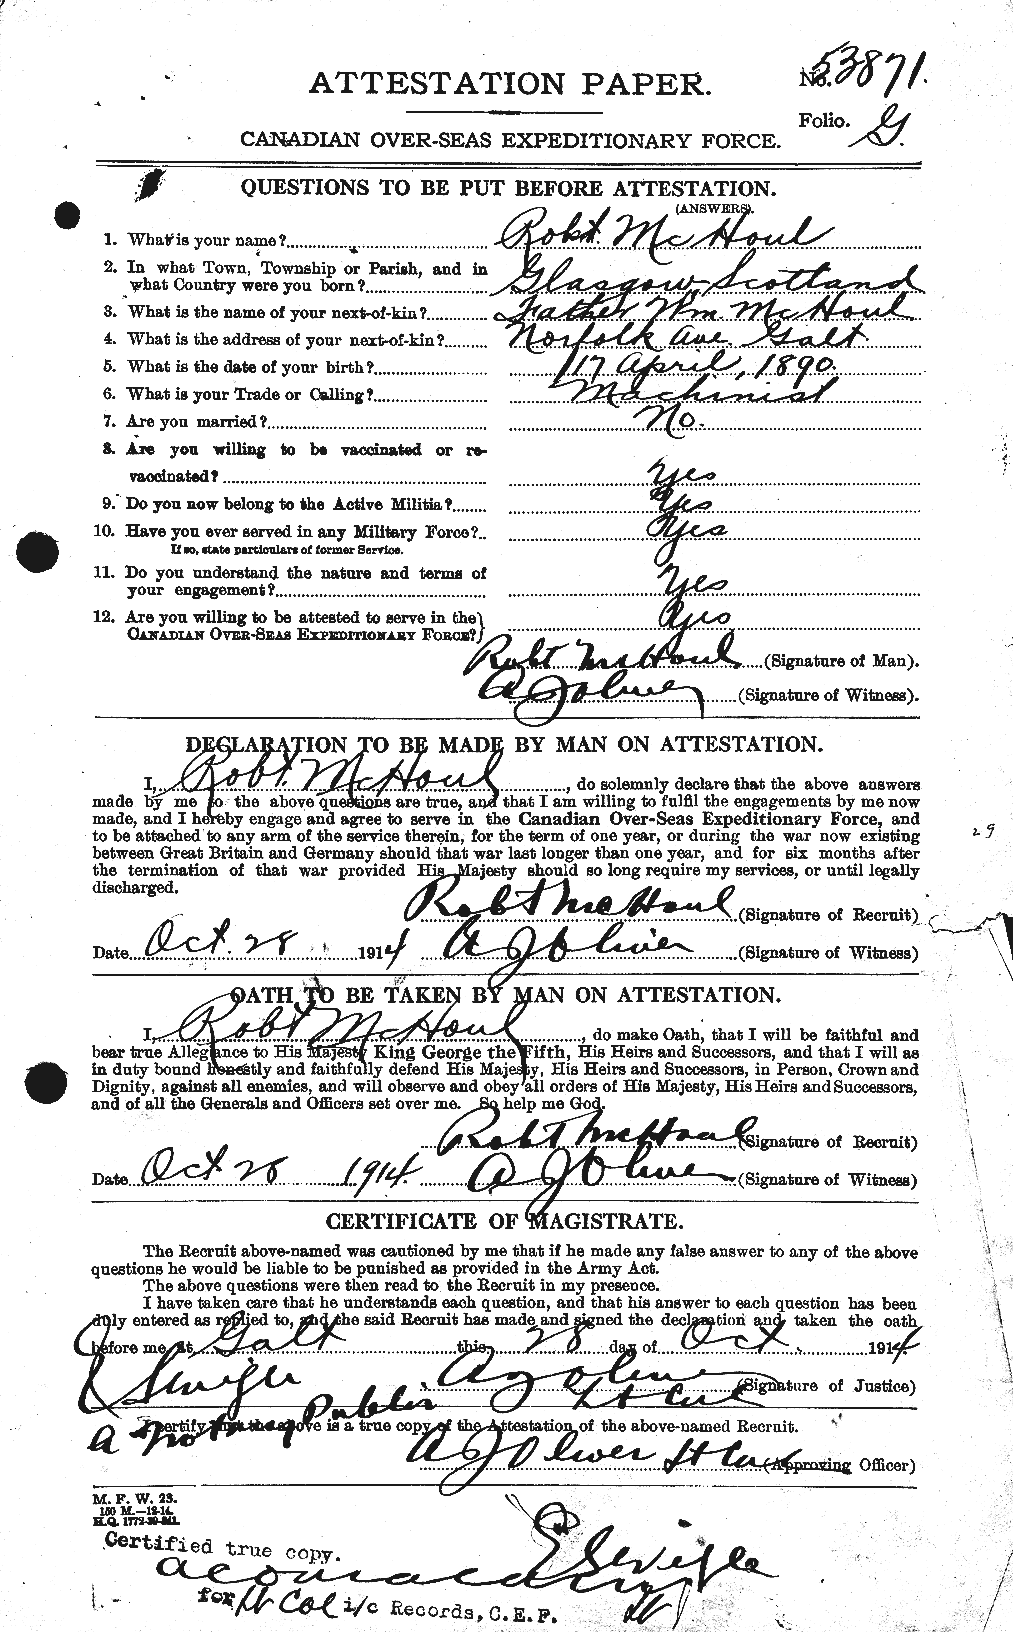 Personnel Records of the First World War - CEF 524307a